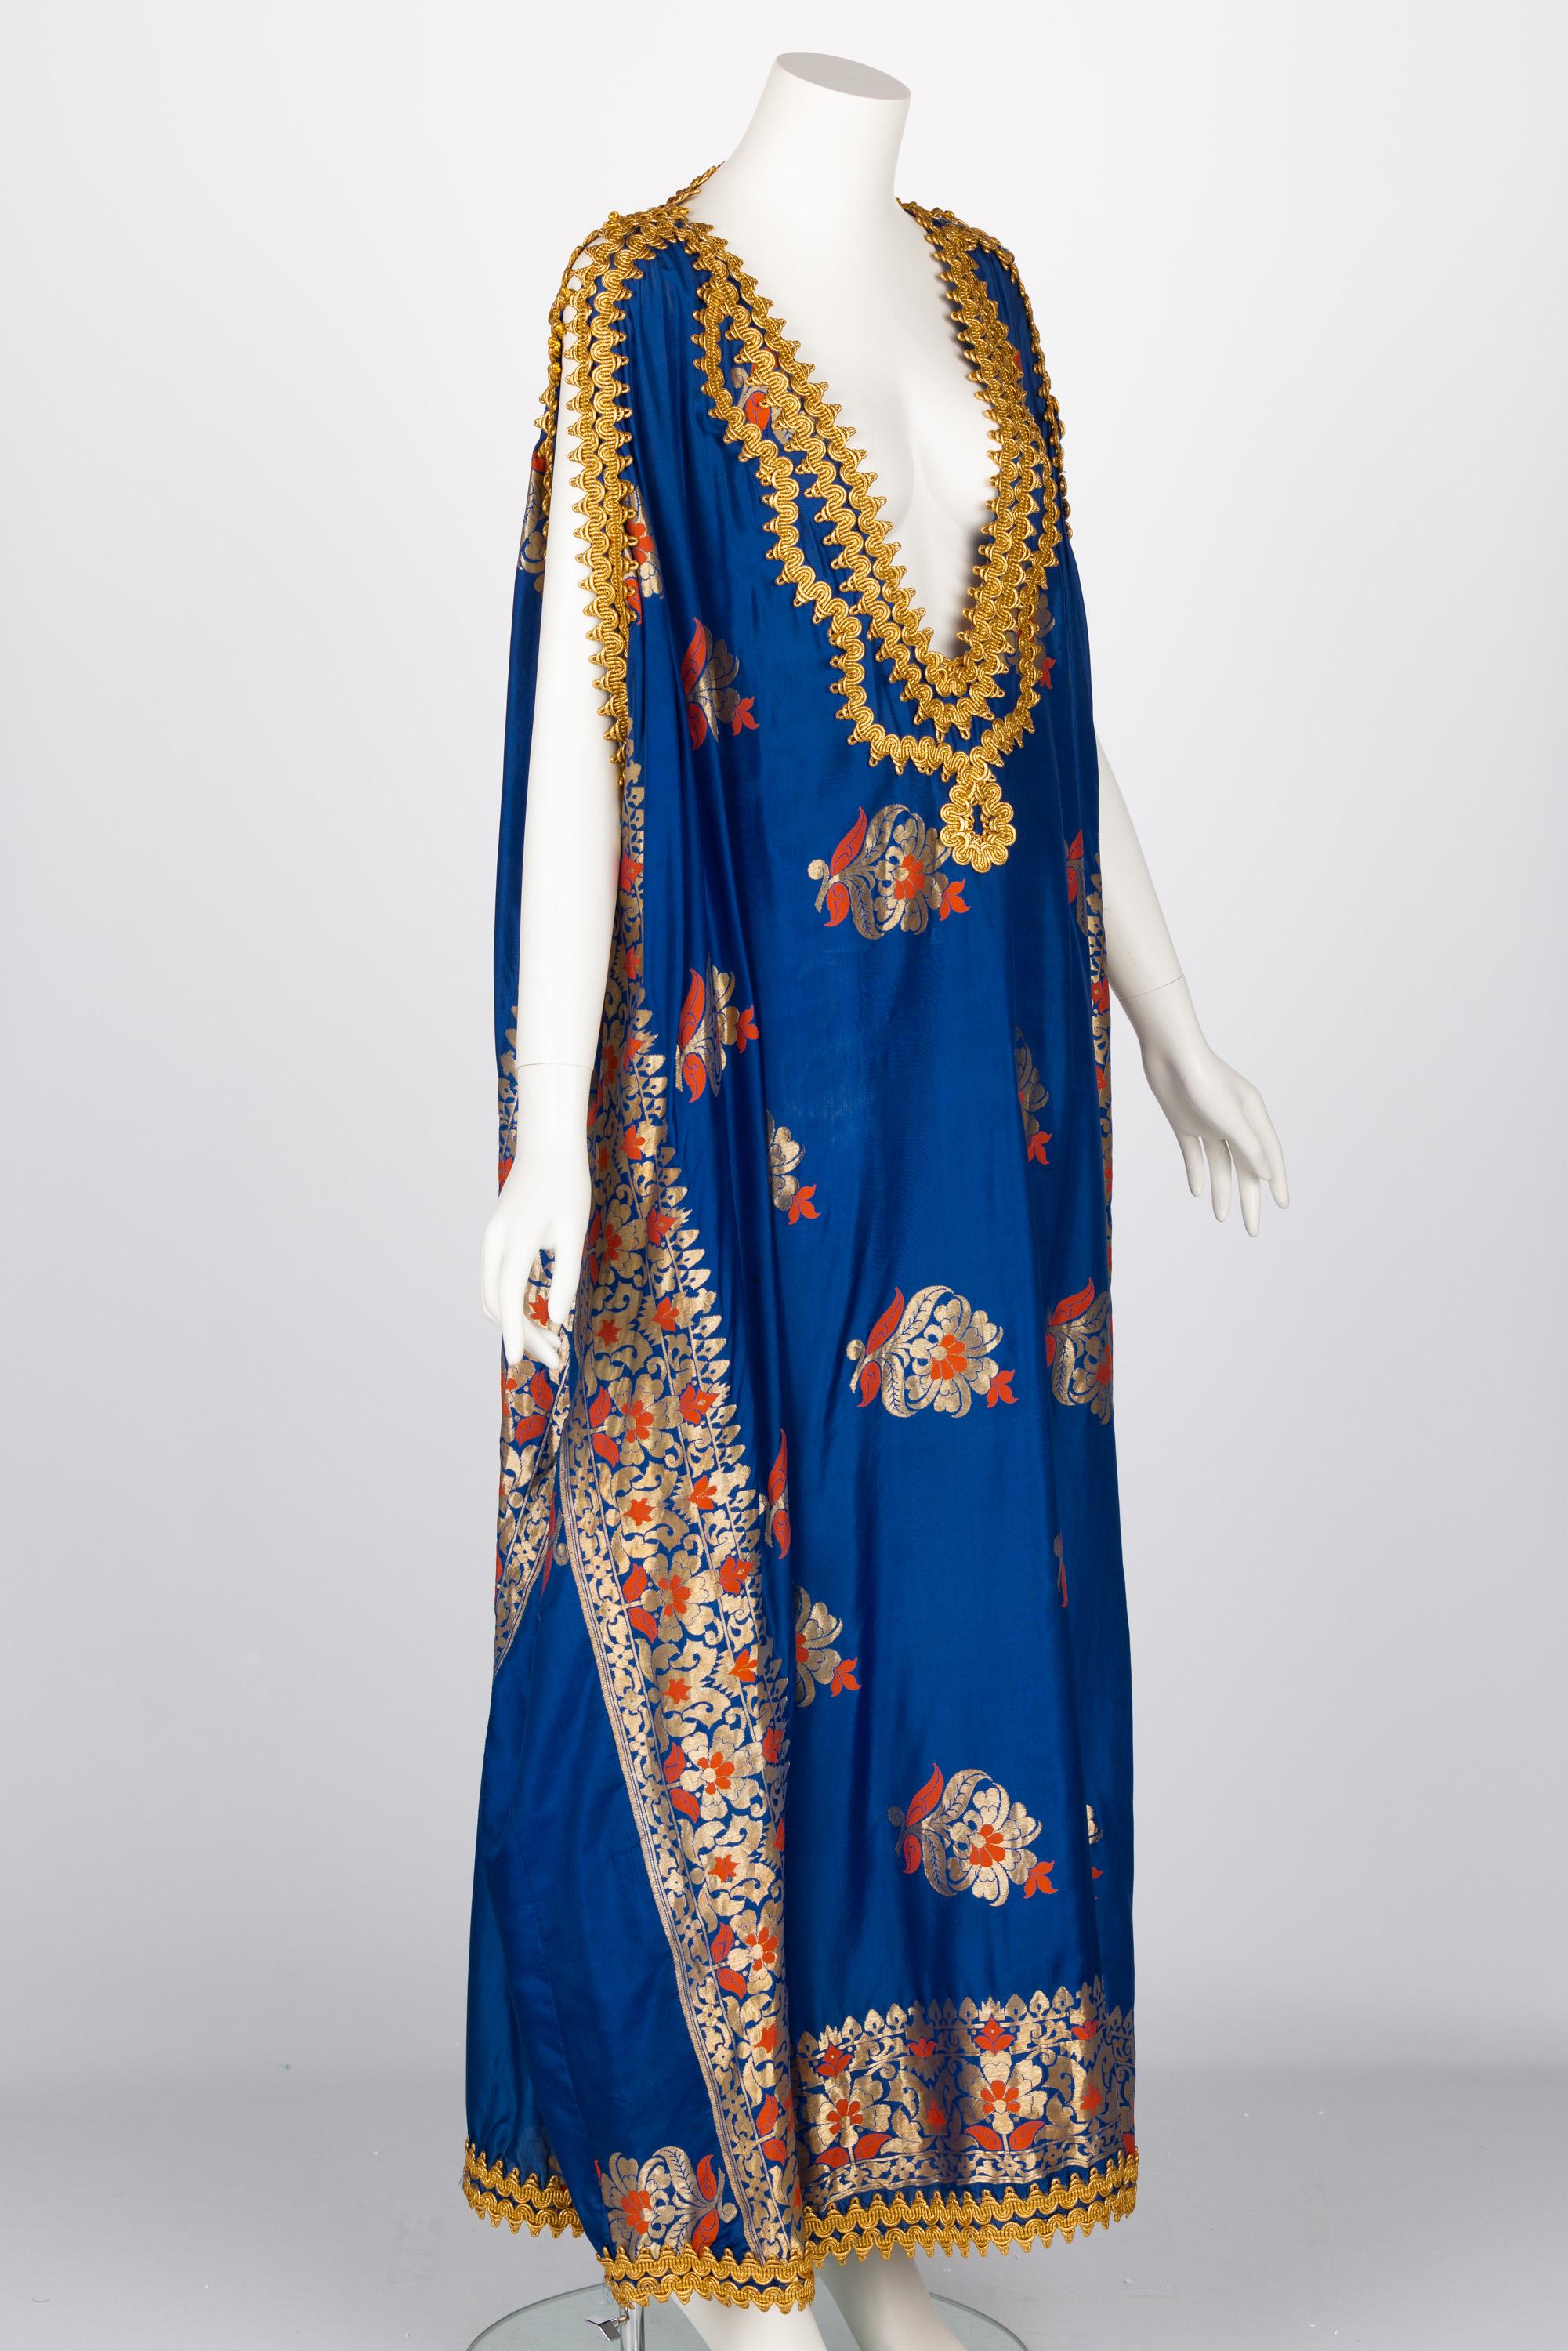 Antique  Royal Blue Silk Gold Embroidered Caftan Dress In Excellent Condition For Sale In Boca Raton, FL